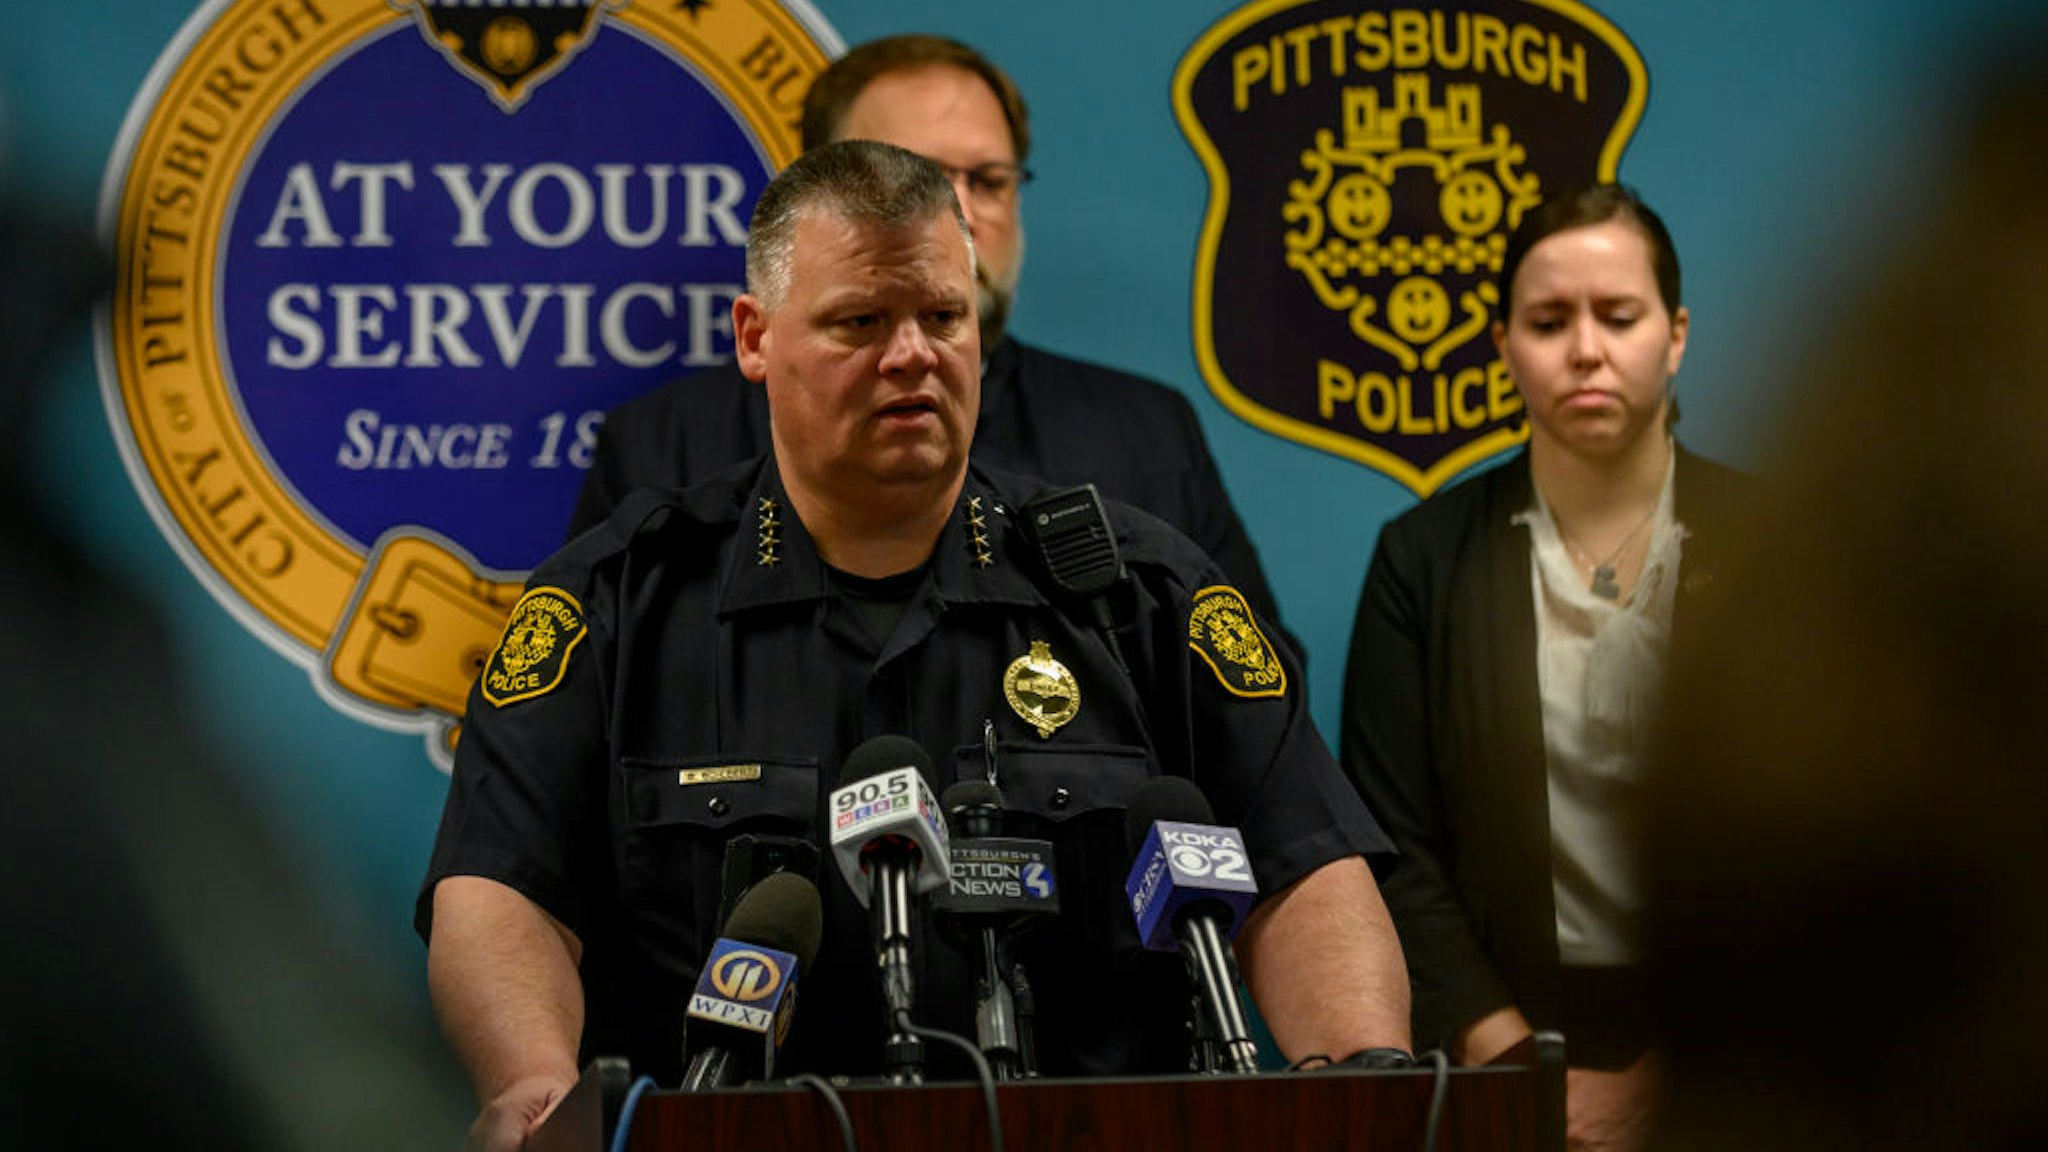 PITTSBURGH, PA - APRIL 17: Pittsburgh Police Chief Scott Schubert describes the mayhem outside an Airbnb apartment rental along Suismon Street on April 17, 2022 in Pittsburgh, Pennsylvania. Last night, a shooting at a house party at the rental left two people dead and nine injured. (Photo by Jeff Swensen/Getty Images)